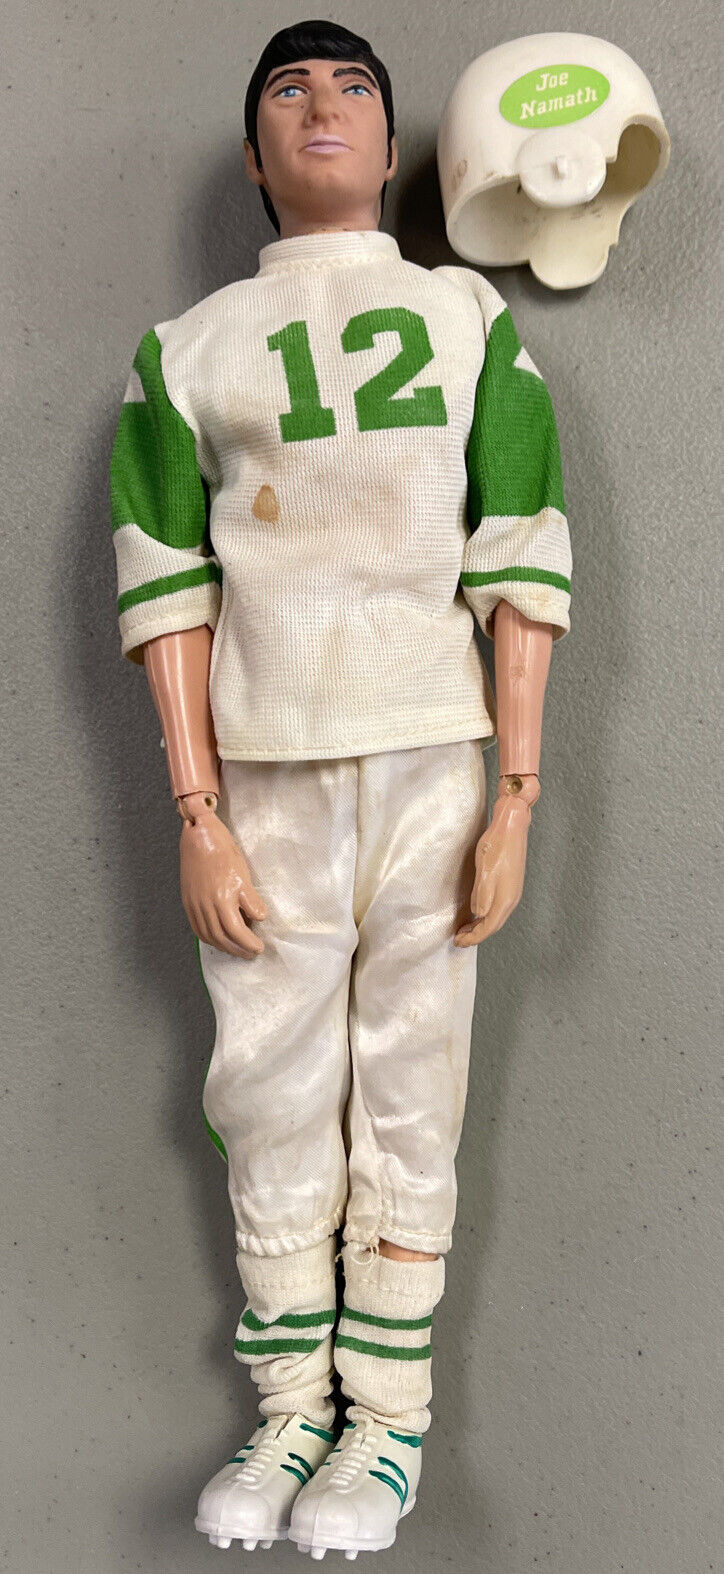 1970 Mego Joe Namath 12” Action Figure With Wardrobe Accessories Collection